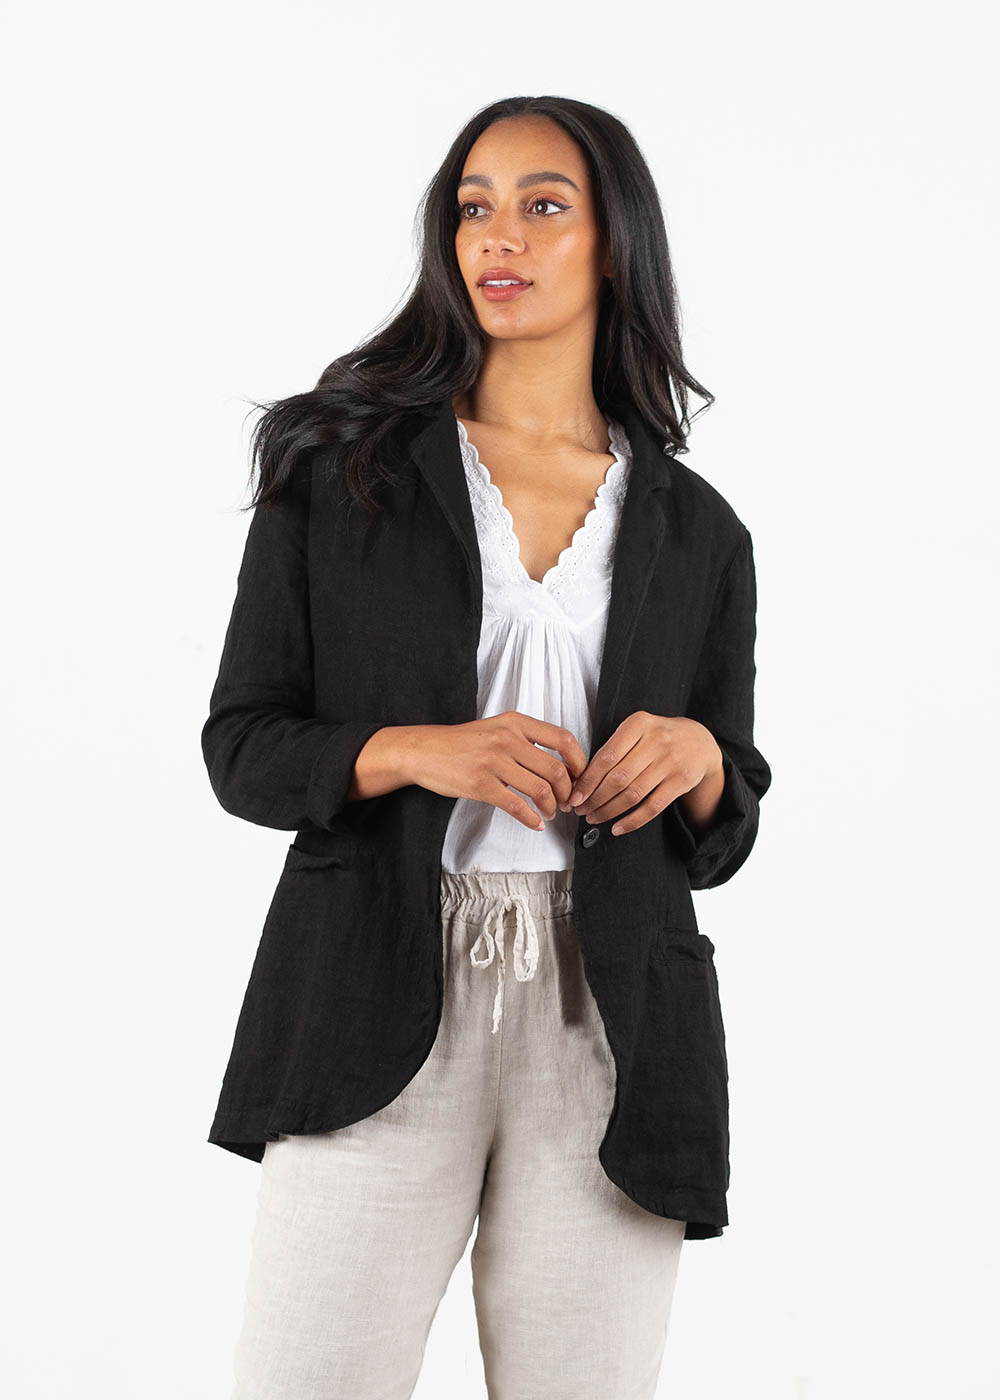 A model wearing a black linen jacket over a white top and oatmeal coloured linen trousers